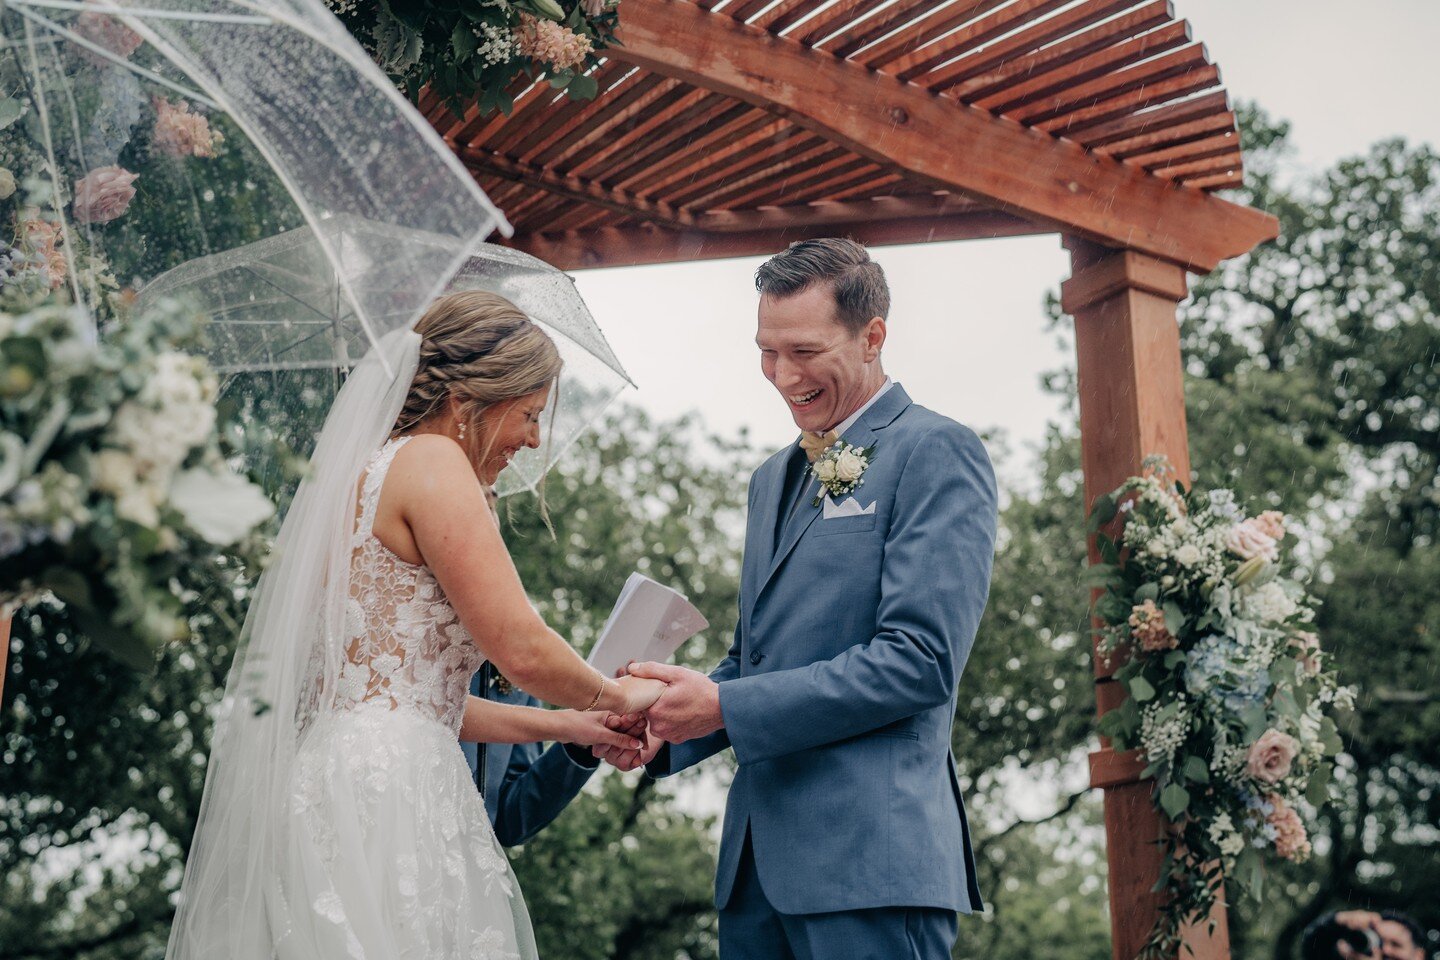 Yesterdays drizzly weather had me thinking about this sweet wedding. We can't control the weather but this couple still had the most joyful event.

How beautiful is this arbor made by one of the Fathers? I just love adding florals to a structure made